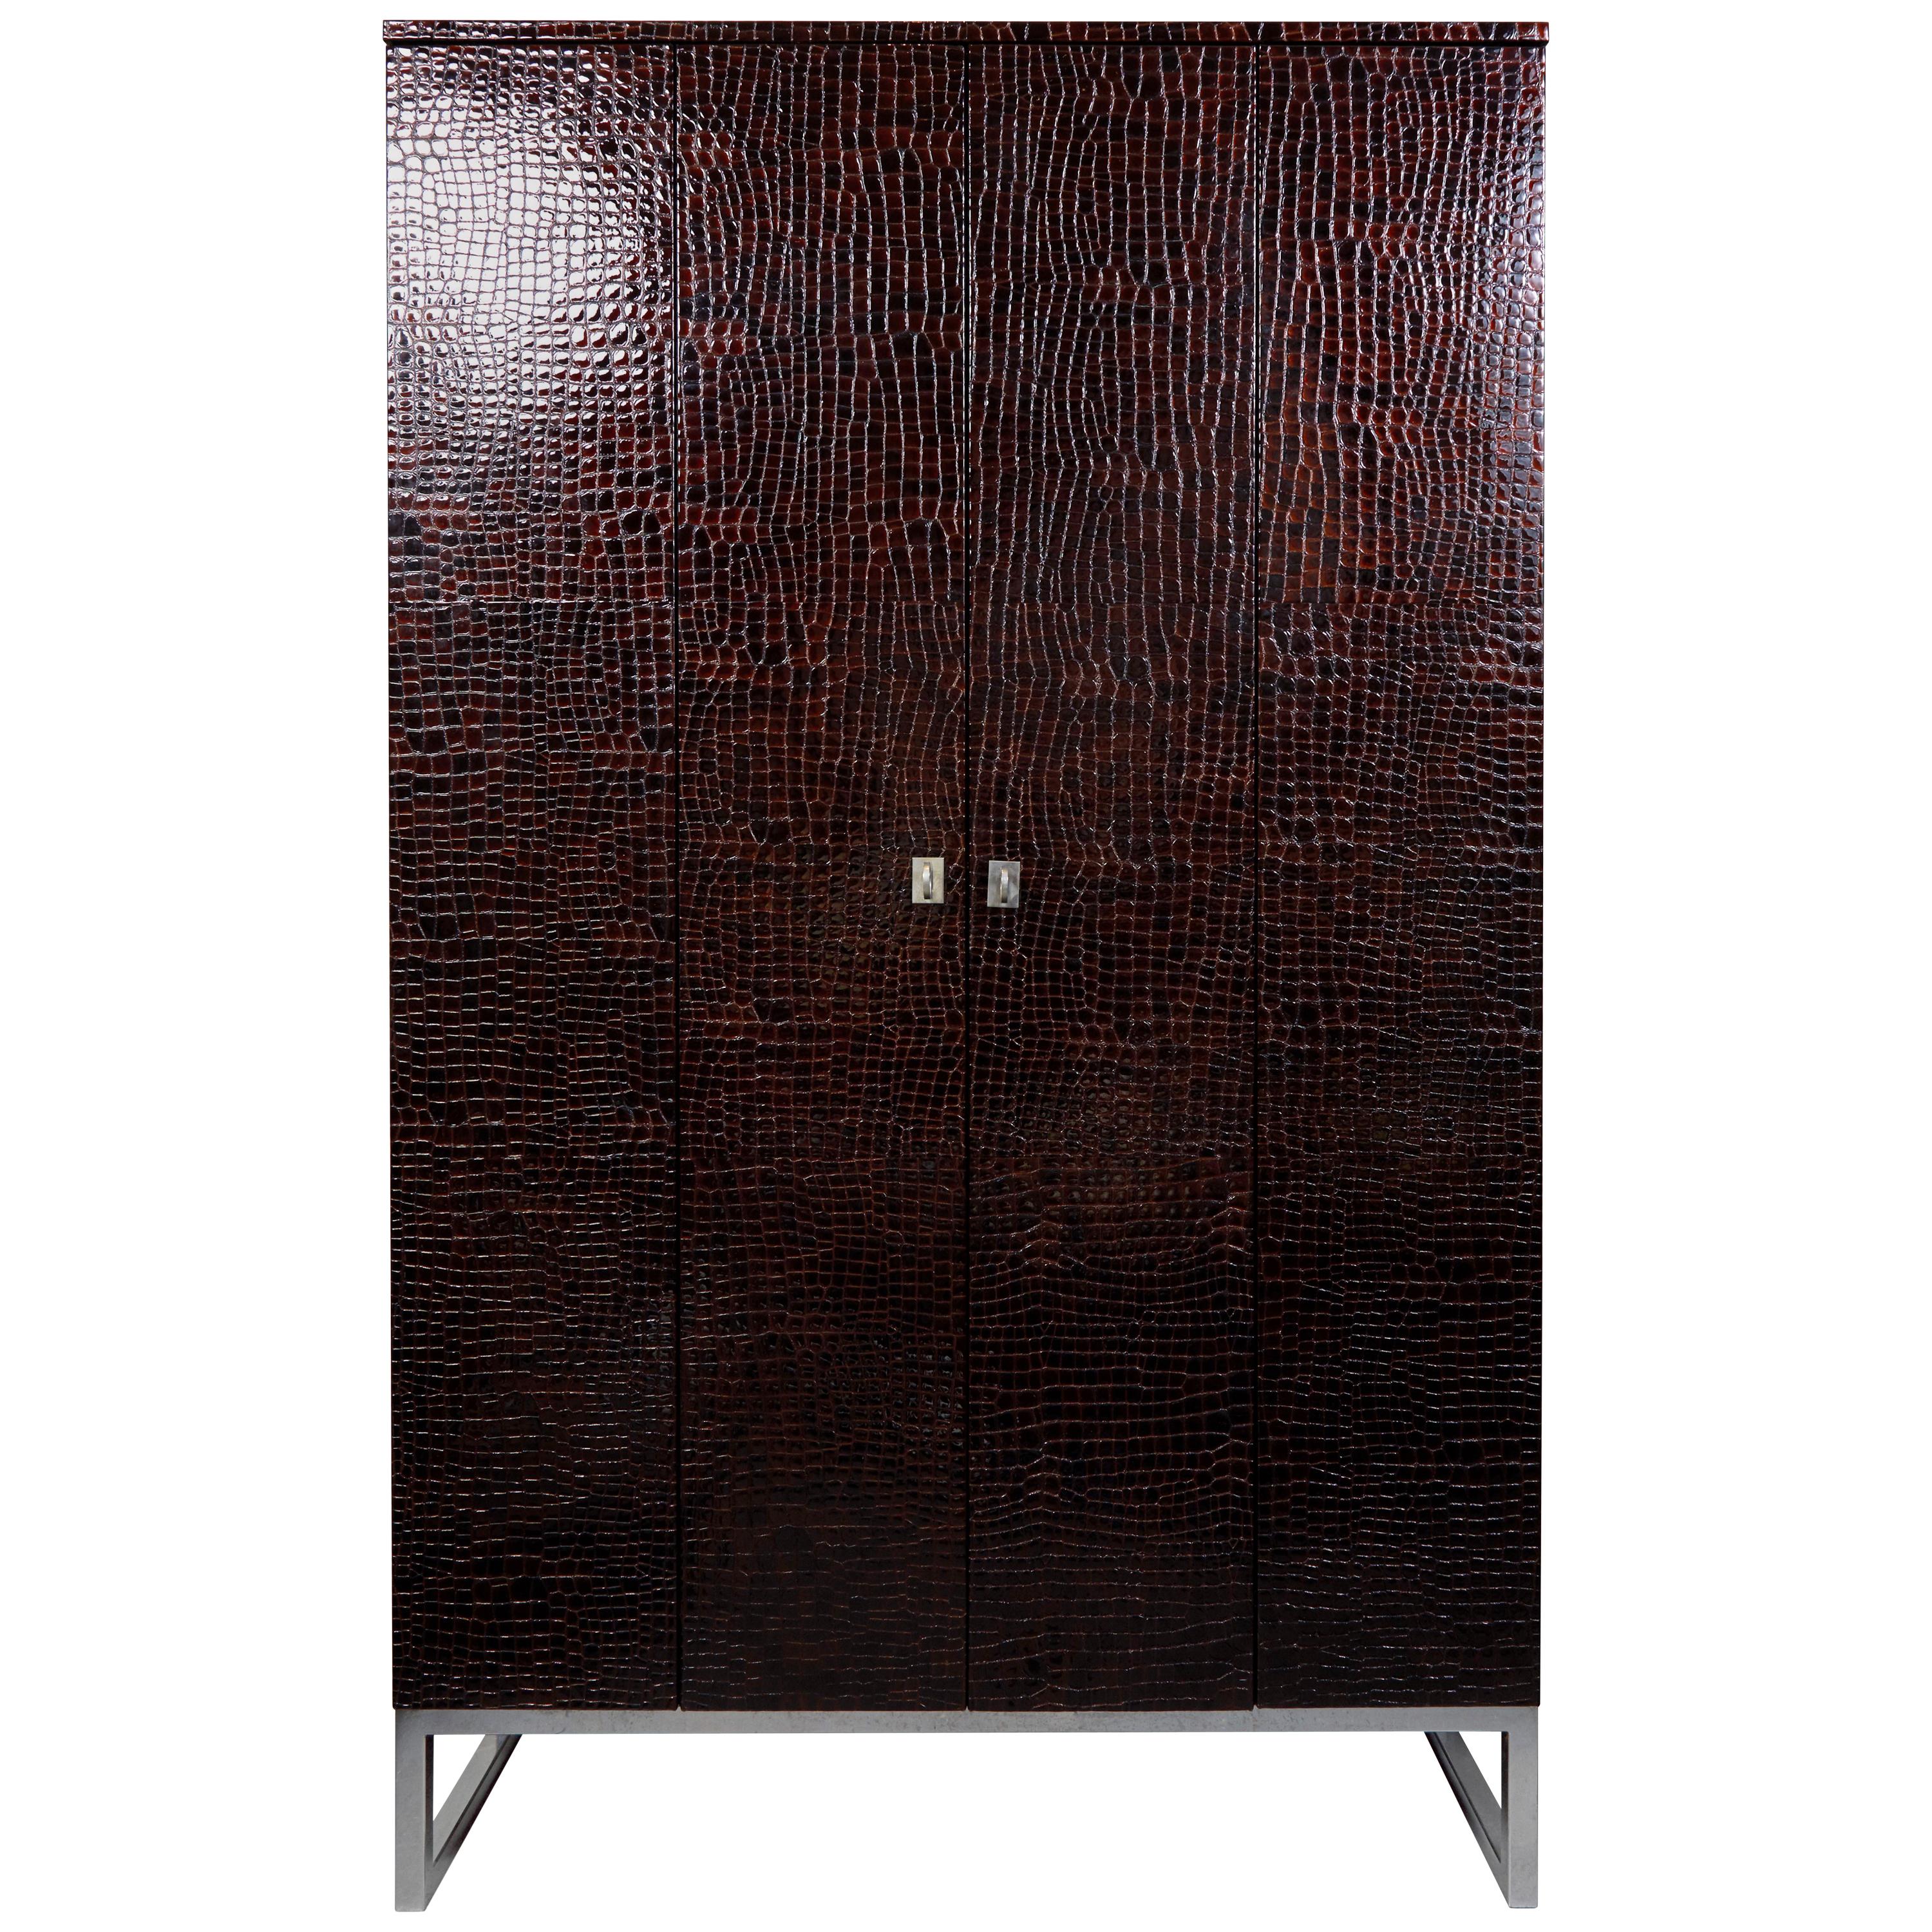 A unique crocodile finish bovine leather cabinet on a polished steel base with two doors and five shelves.